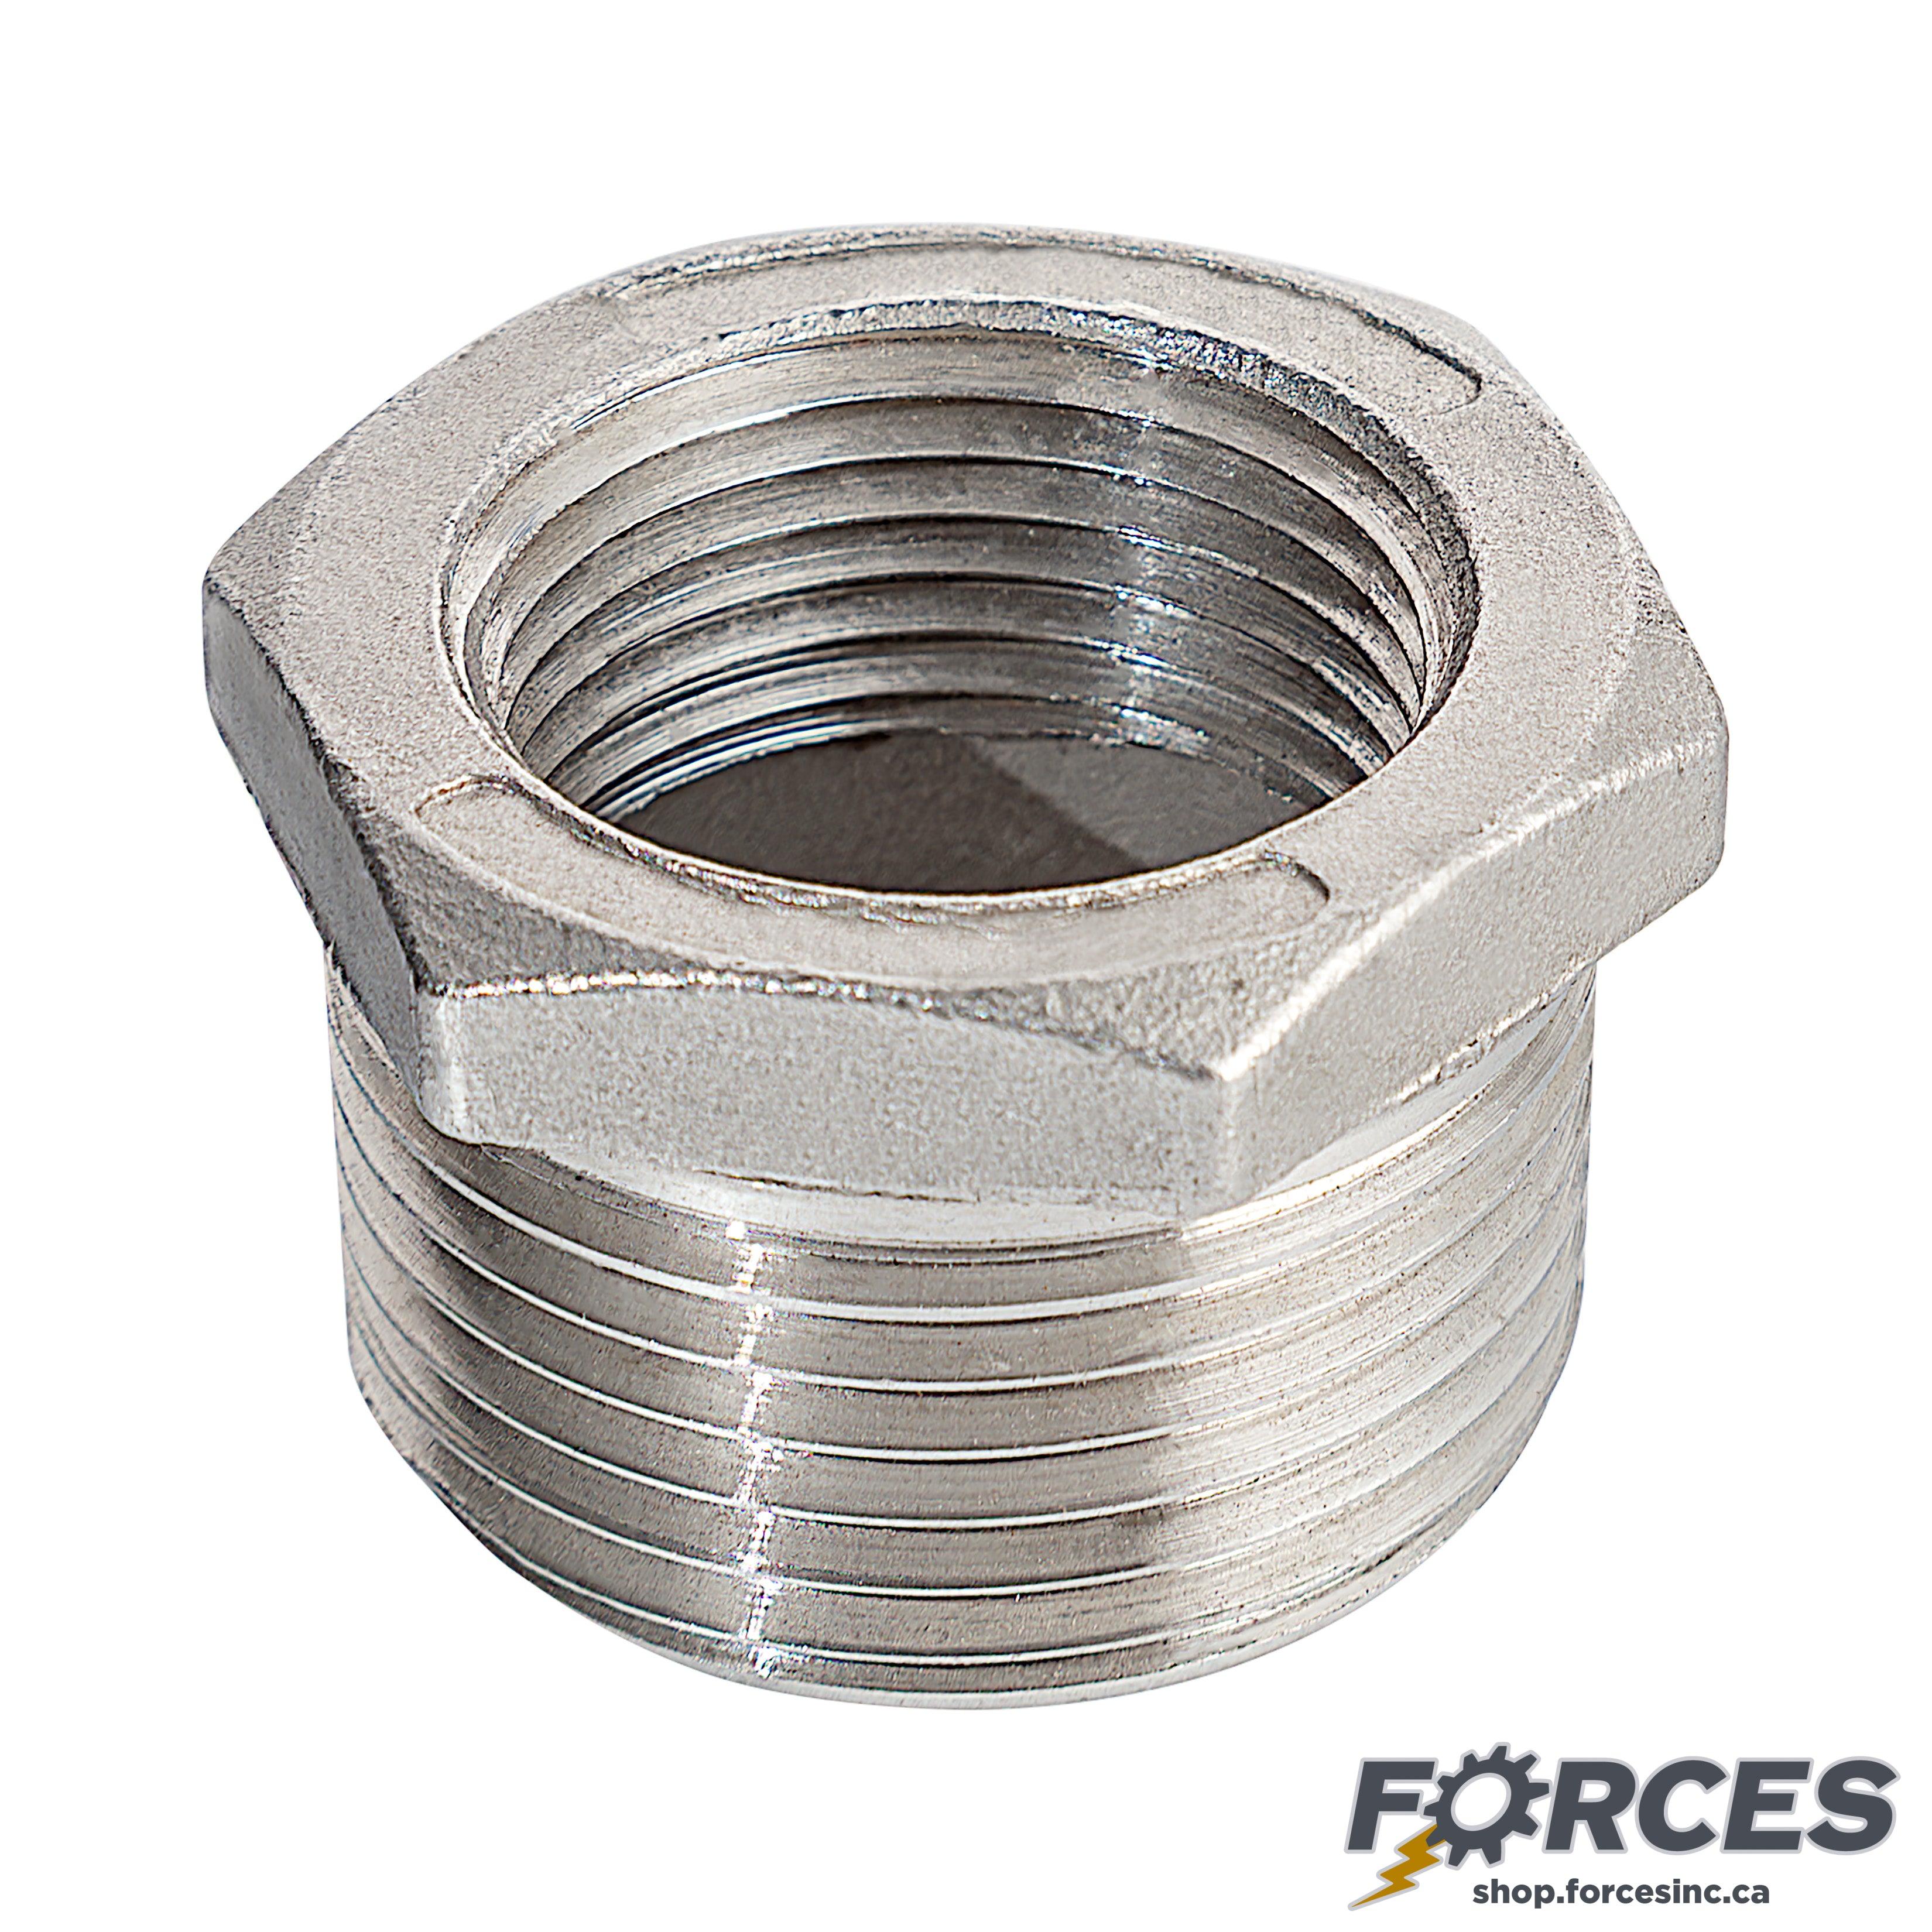 3/4" (M) x 1/4" (F) Reducing Hex Bushing NPT #150 - Stainless Steel 316 - Forces Inc